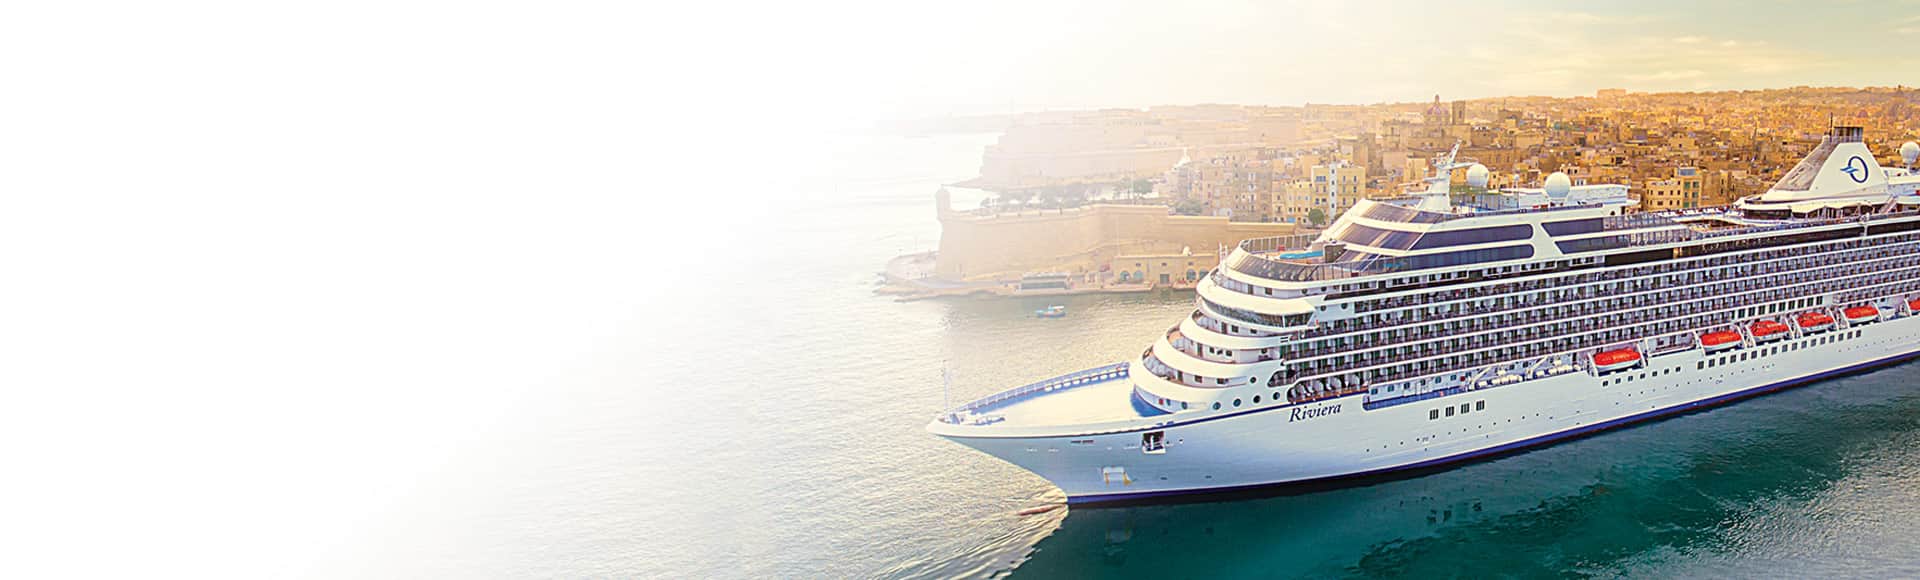 Riviera cruise ship visits a sea port from itinerary.